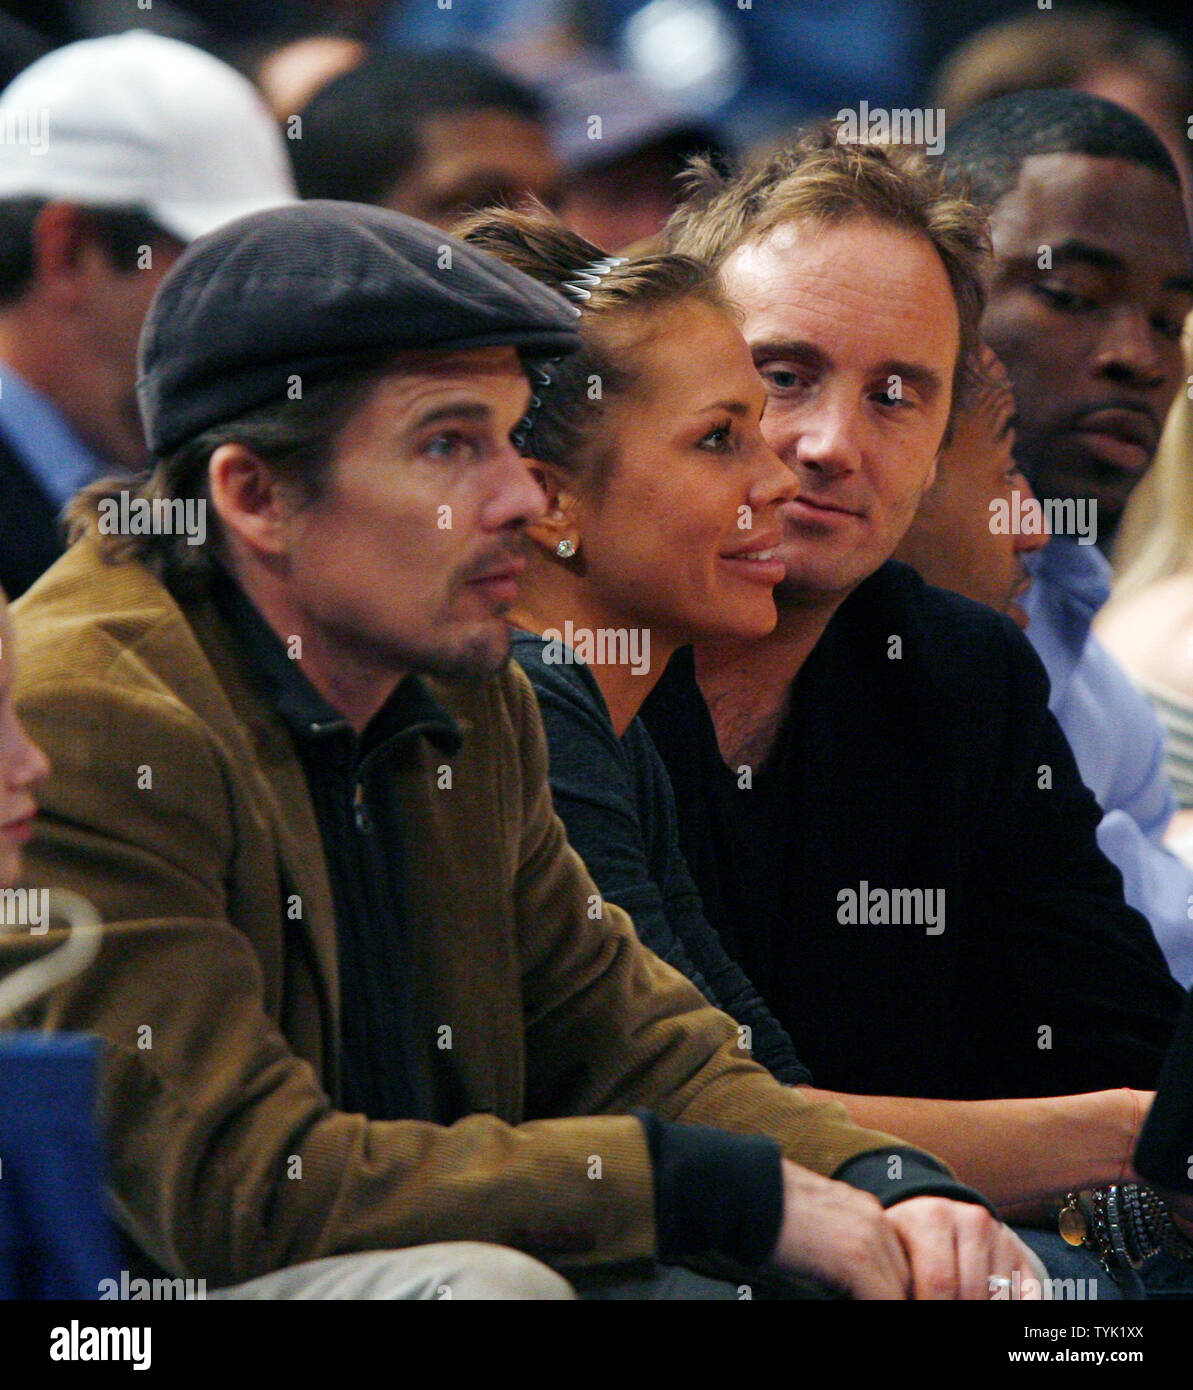 Ethan Hawke, Nikki Cox and Jay Mohr (R) watch the New Jersey Nets play the New York Knicks at Madison Square Garden in New York City on March 18, 2009. The Nets defeated the Knicks 115-89.    (UPI Photo/John Angelillo) Stock Photo